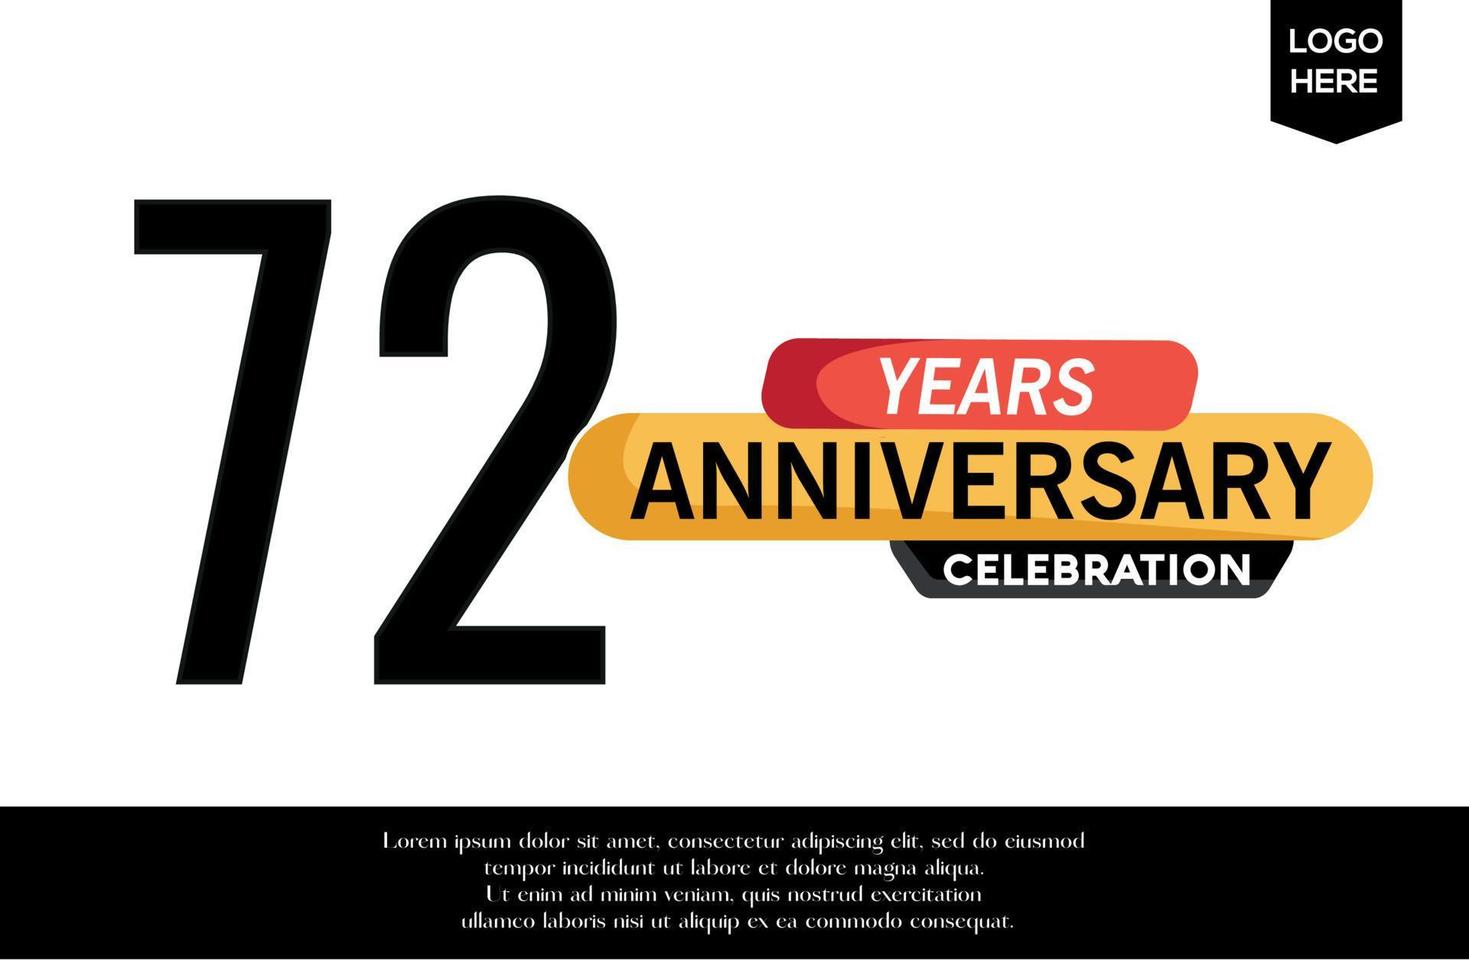 72nd anniversary celebration logotype black yellow colored with text in gray color isolated on white background vector template design